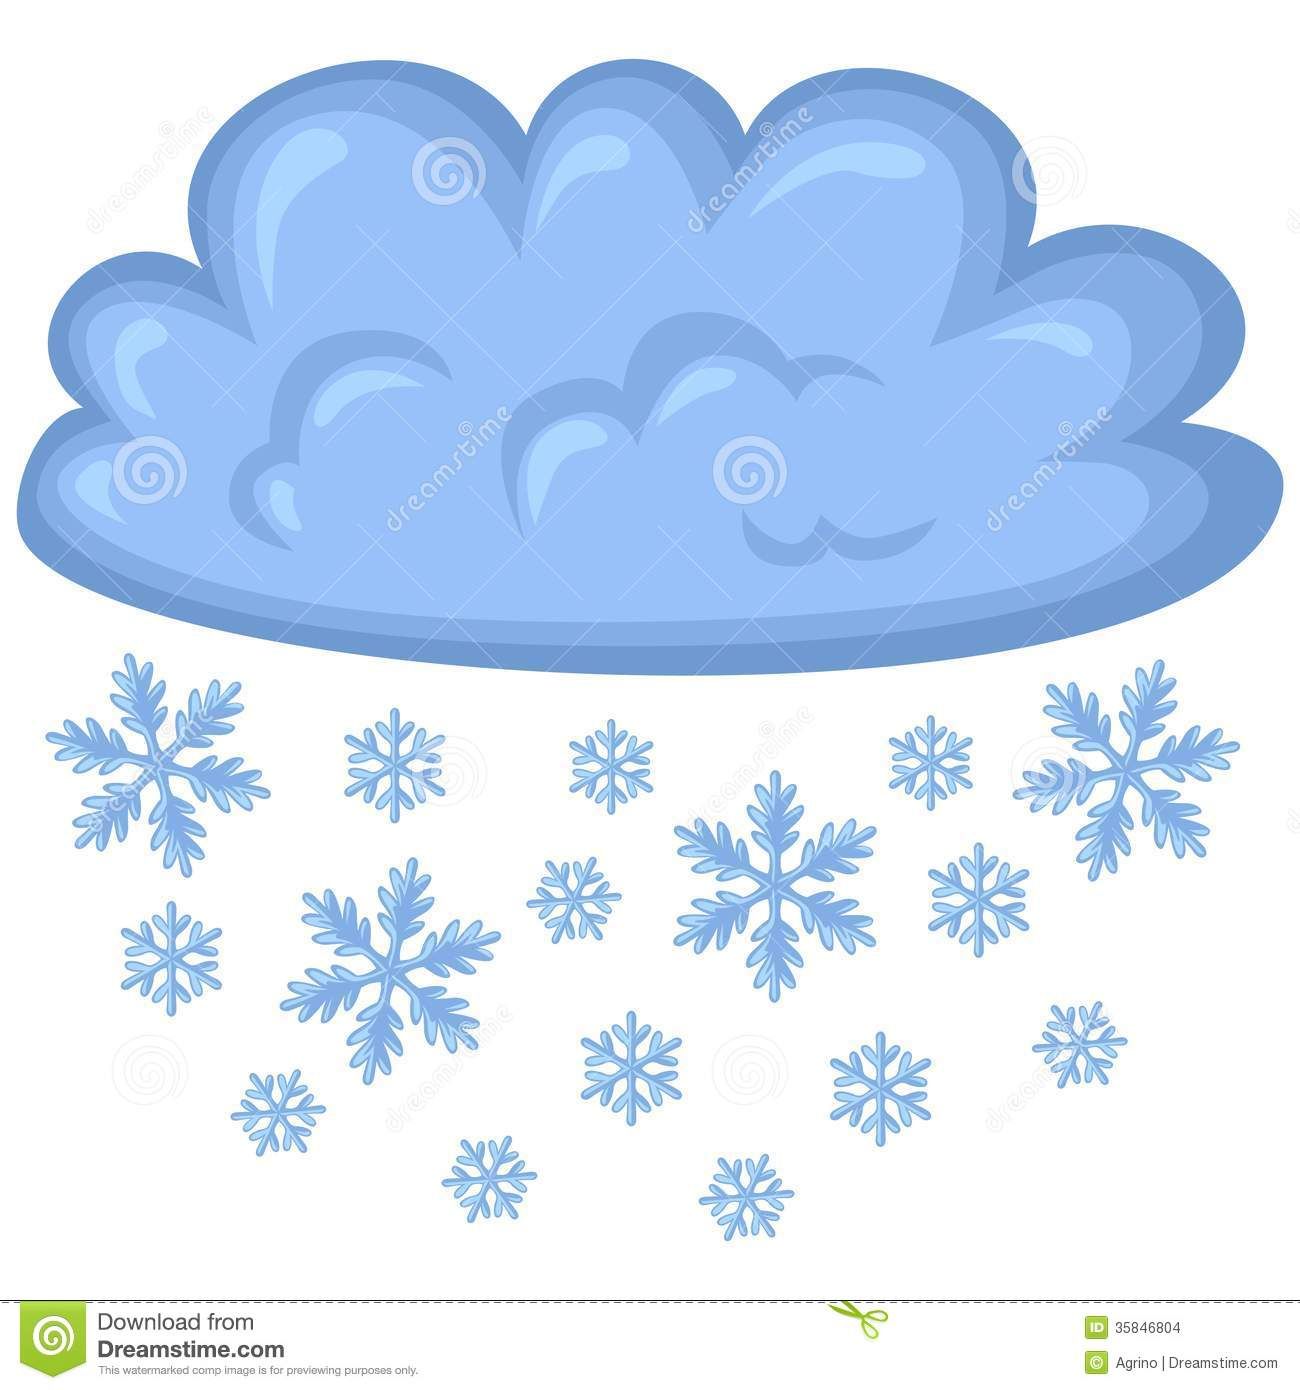 clouds clipart winter